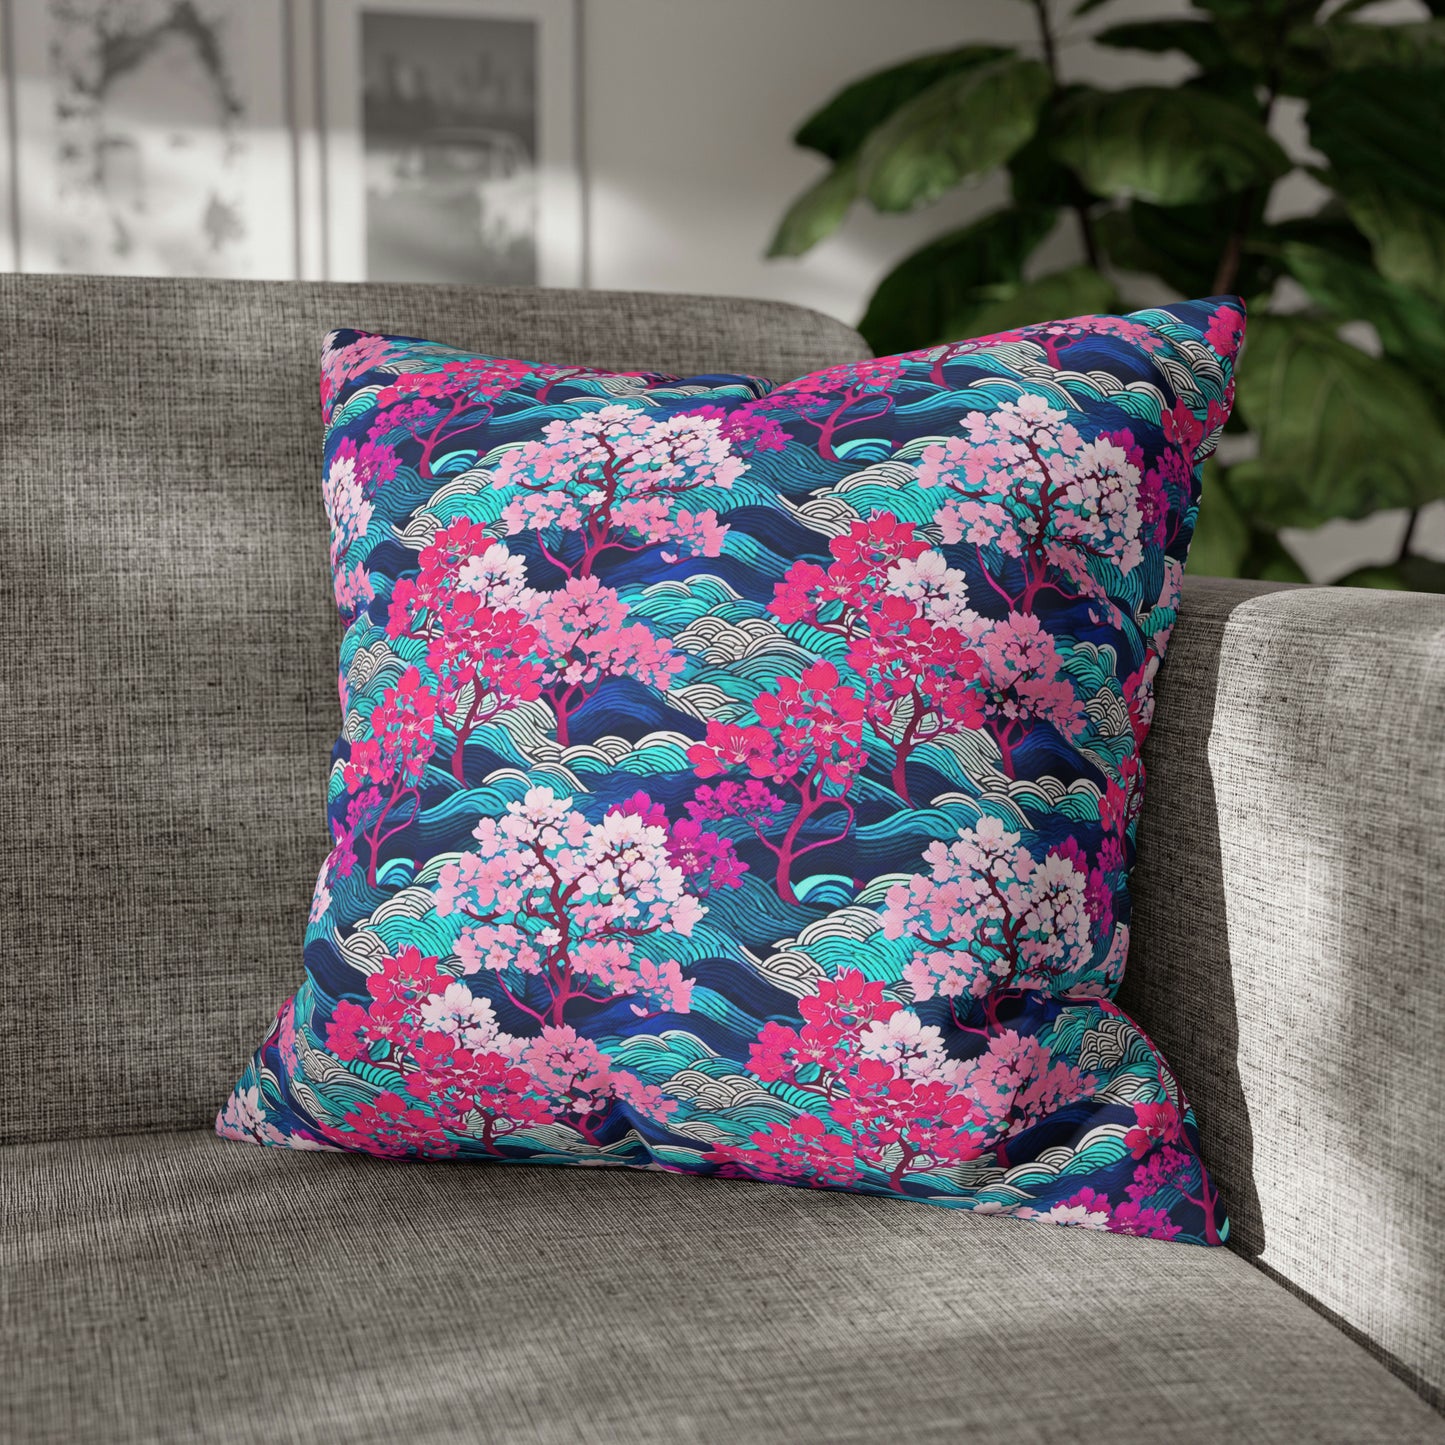 Kyoto Cherry Blossom Wood Block Pattern Japanese Home Decorative Spun Polyester Pillow Cover